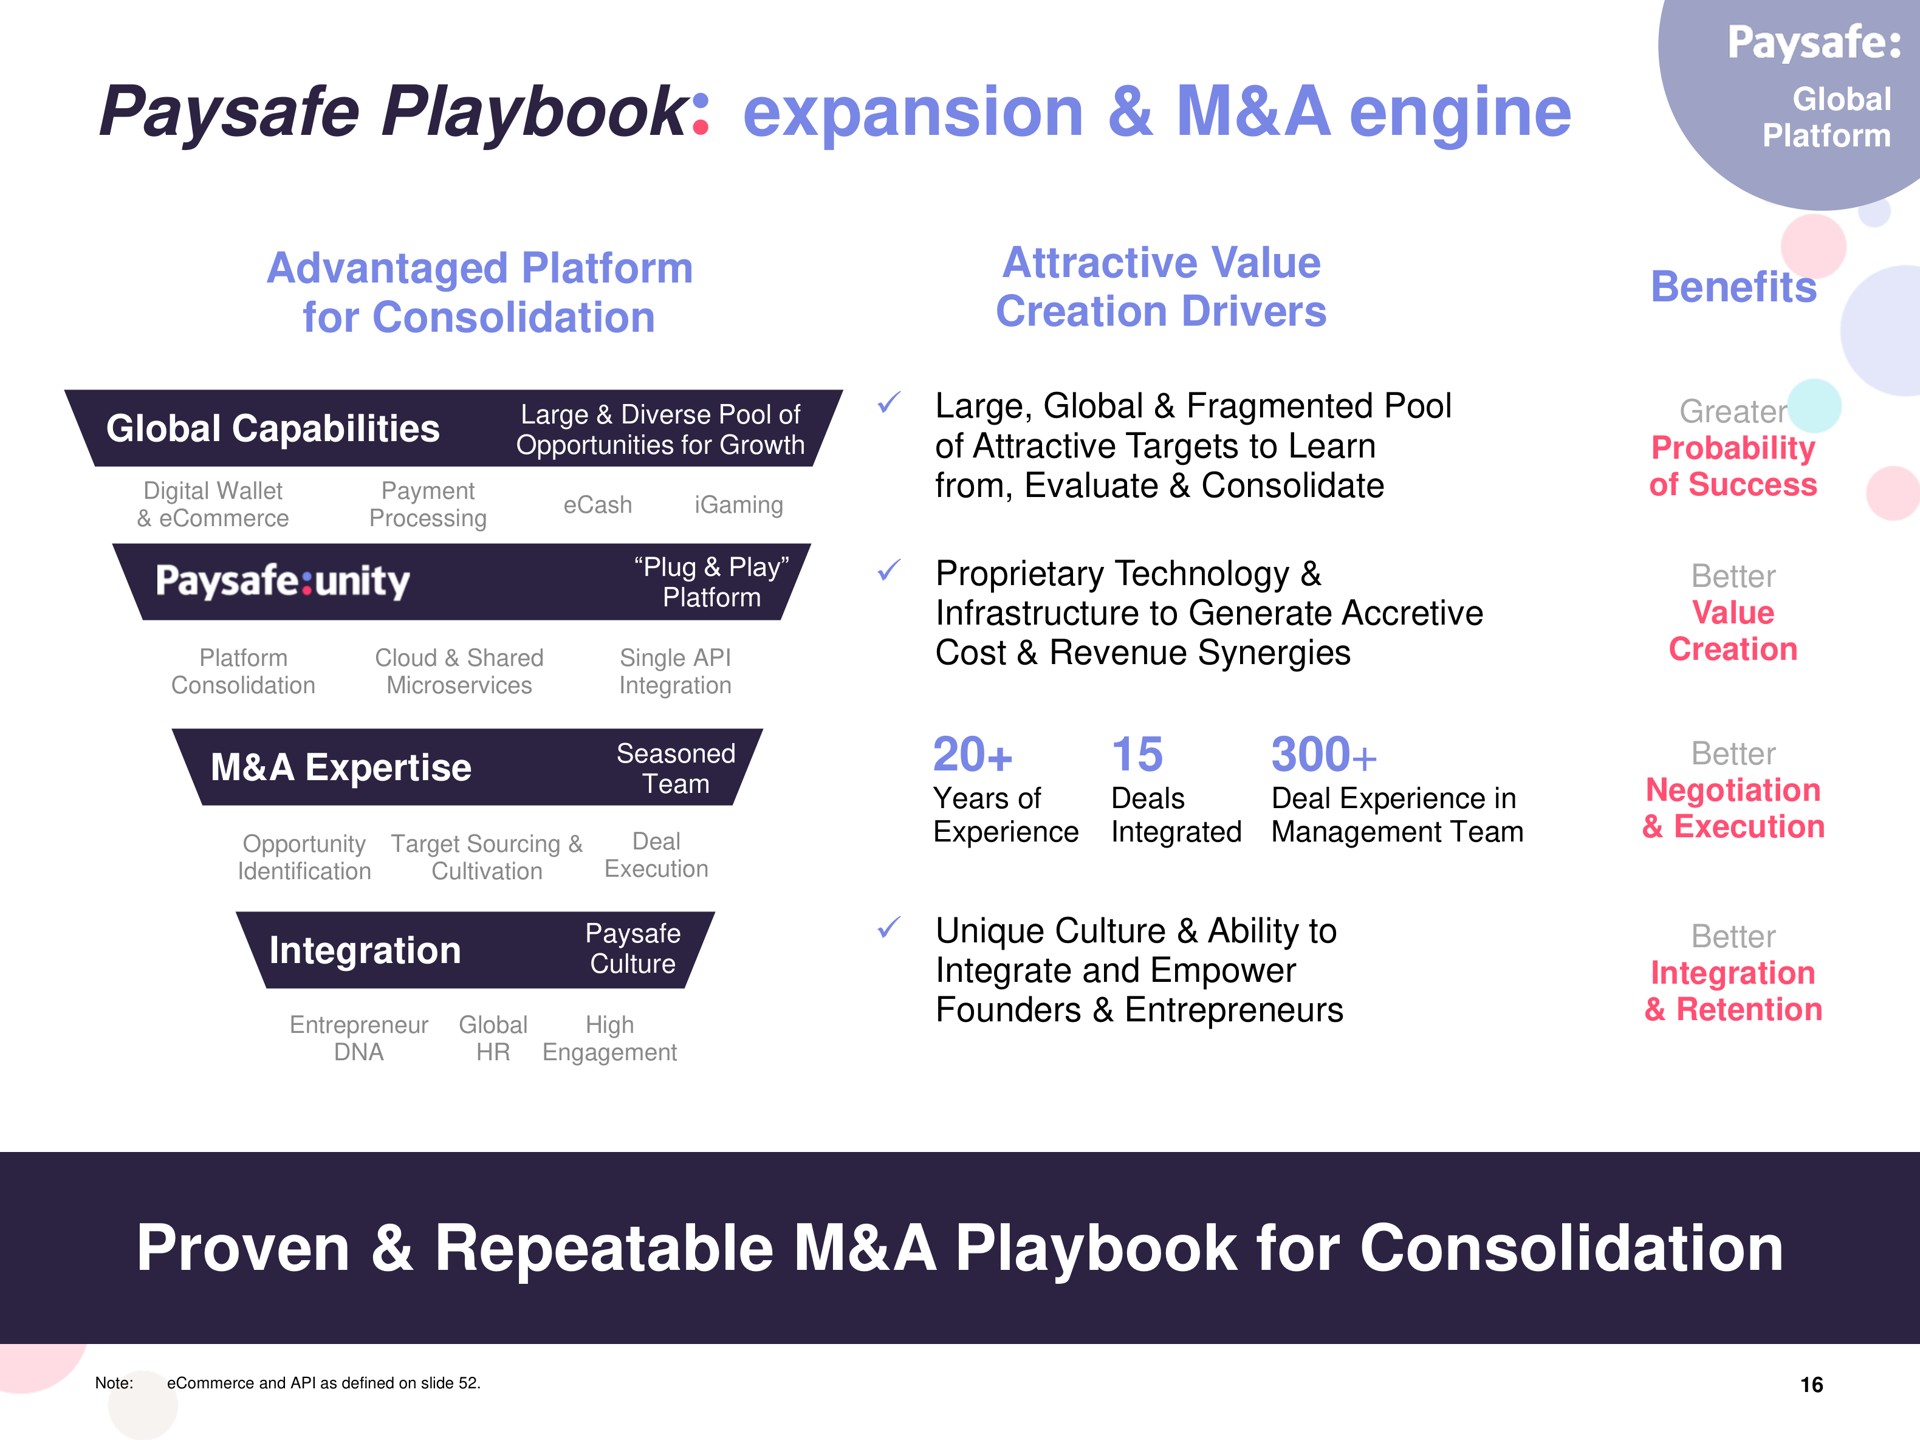 playbook expansion a engine proven repeatable a playbook for consolidation | Paysafe